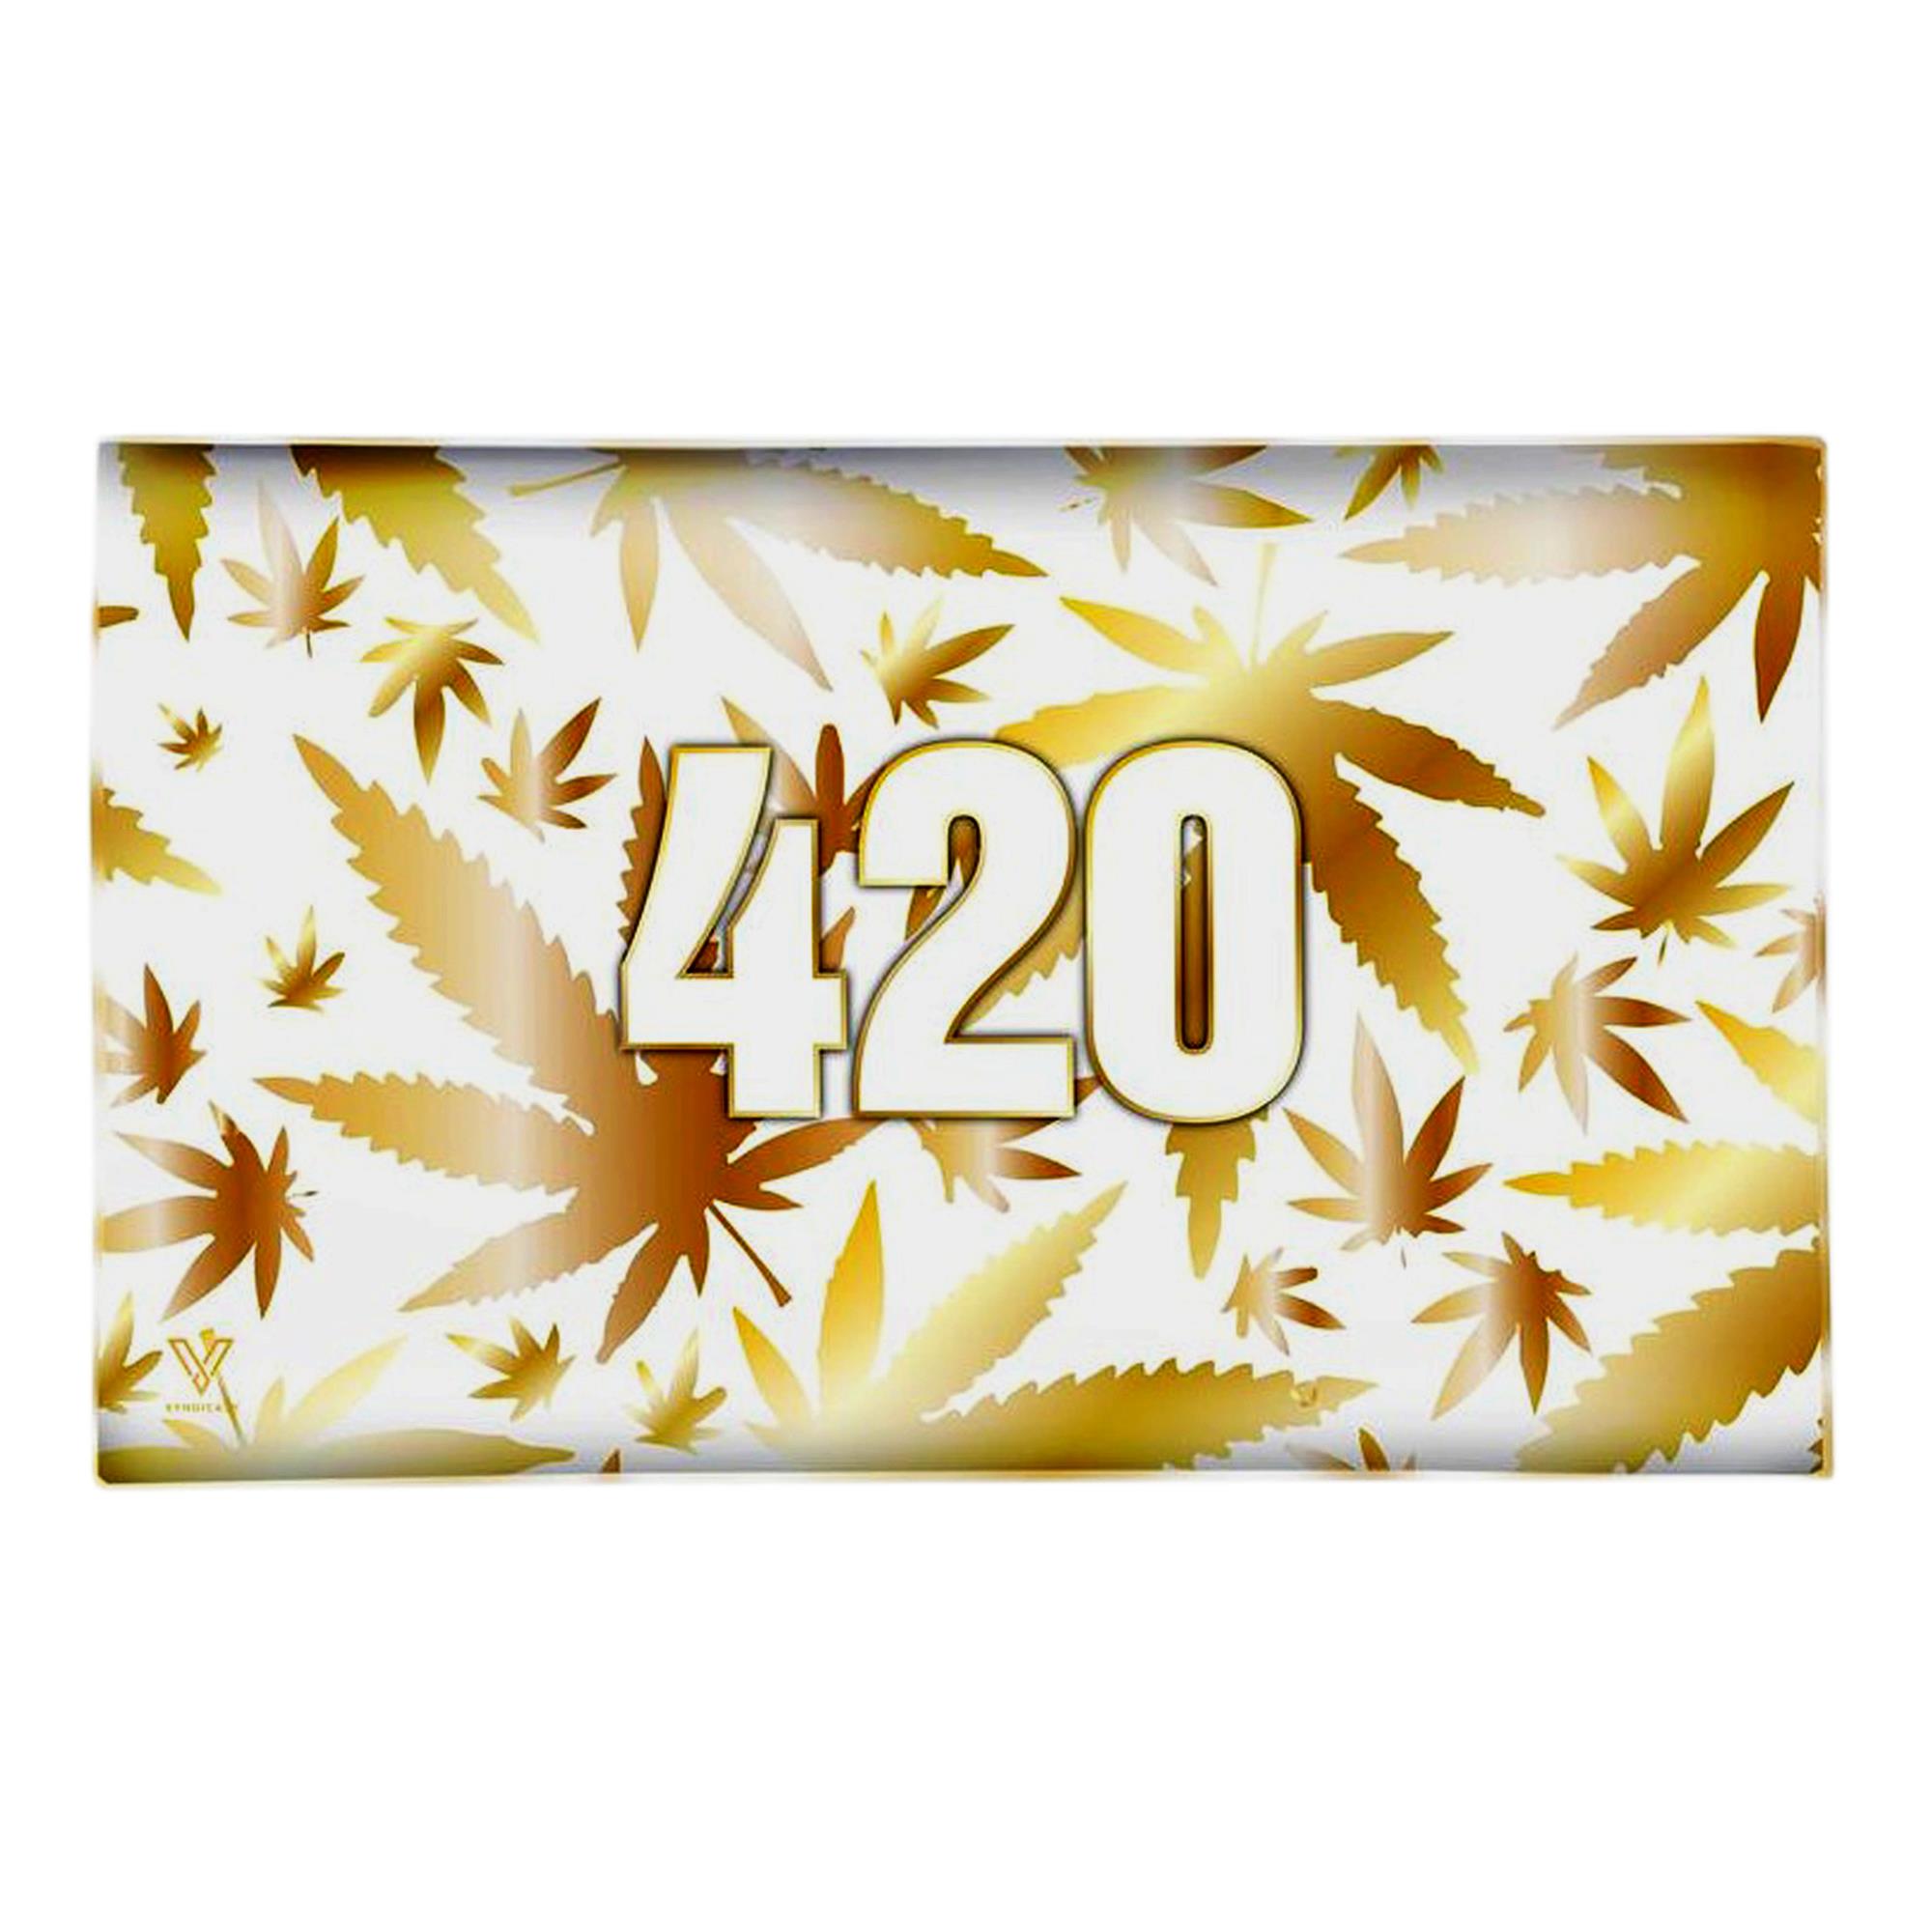 420 GOLD GLASS TRAY